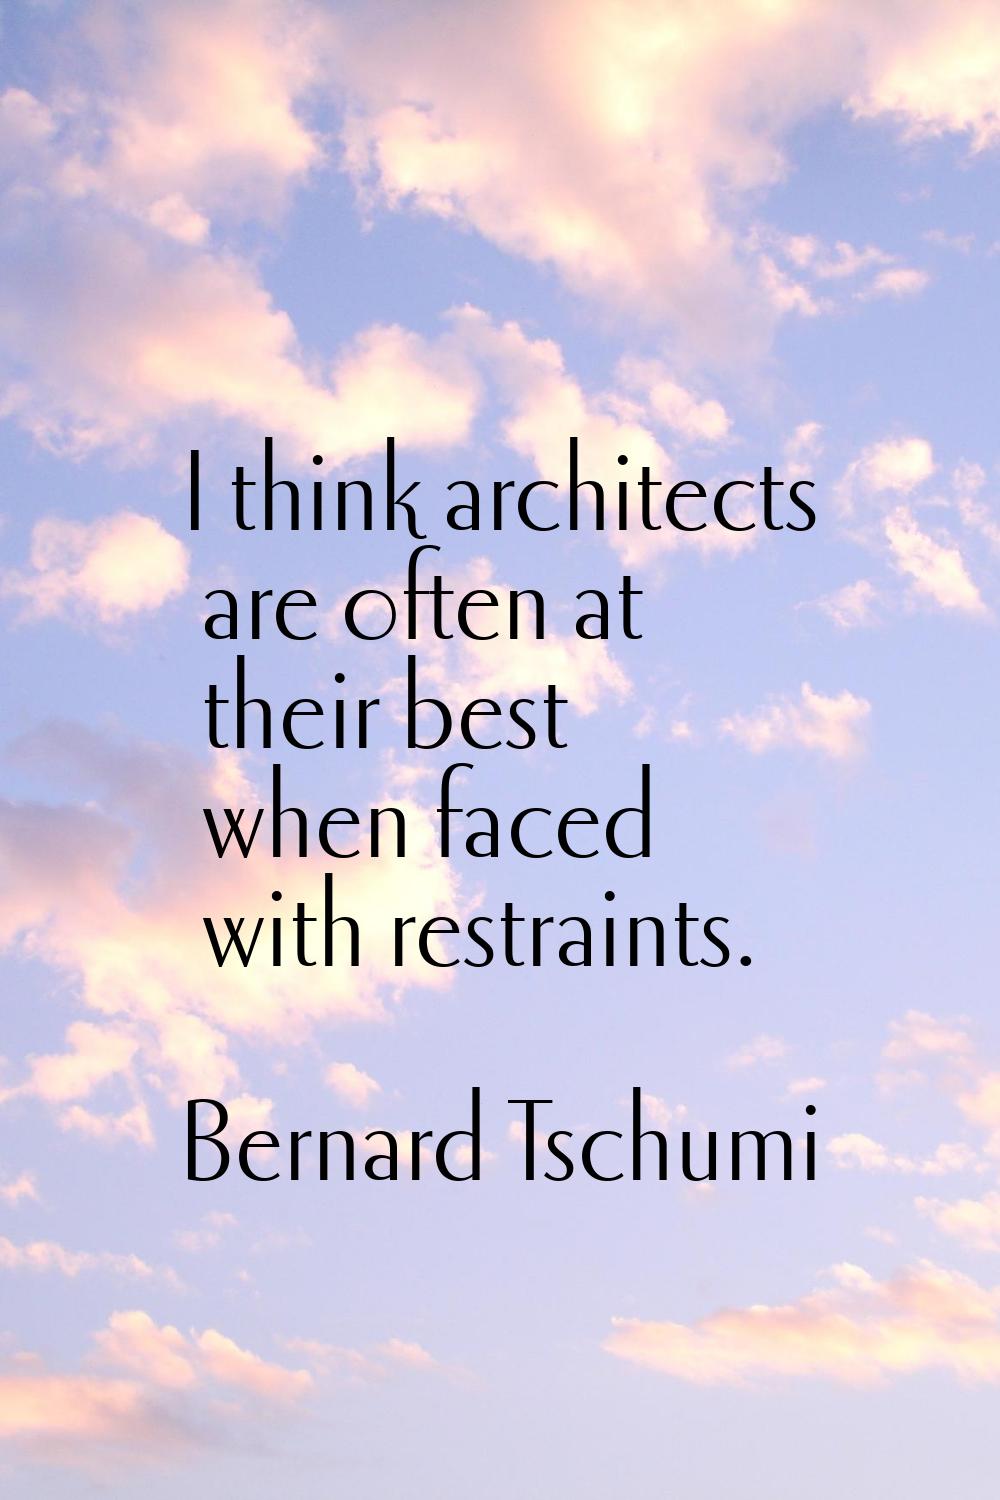 I think architects are often at their best when faced with restraints.